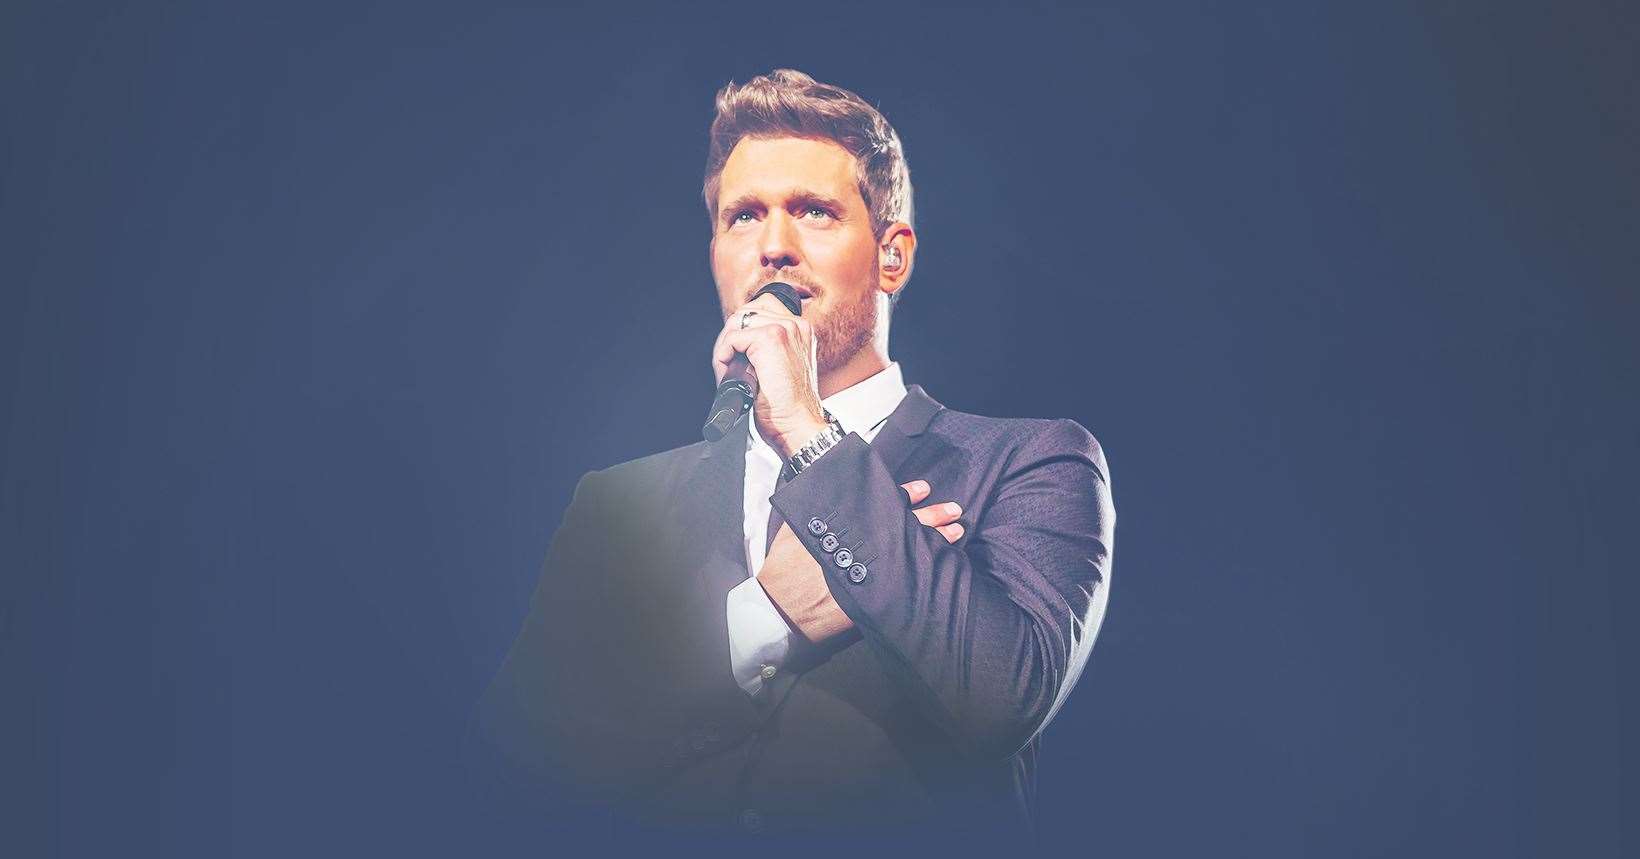 Superstar Michael Bublé is coming to Kent